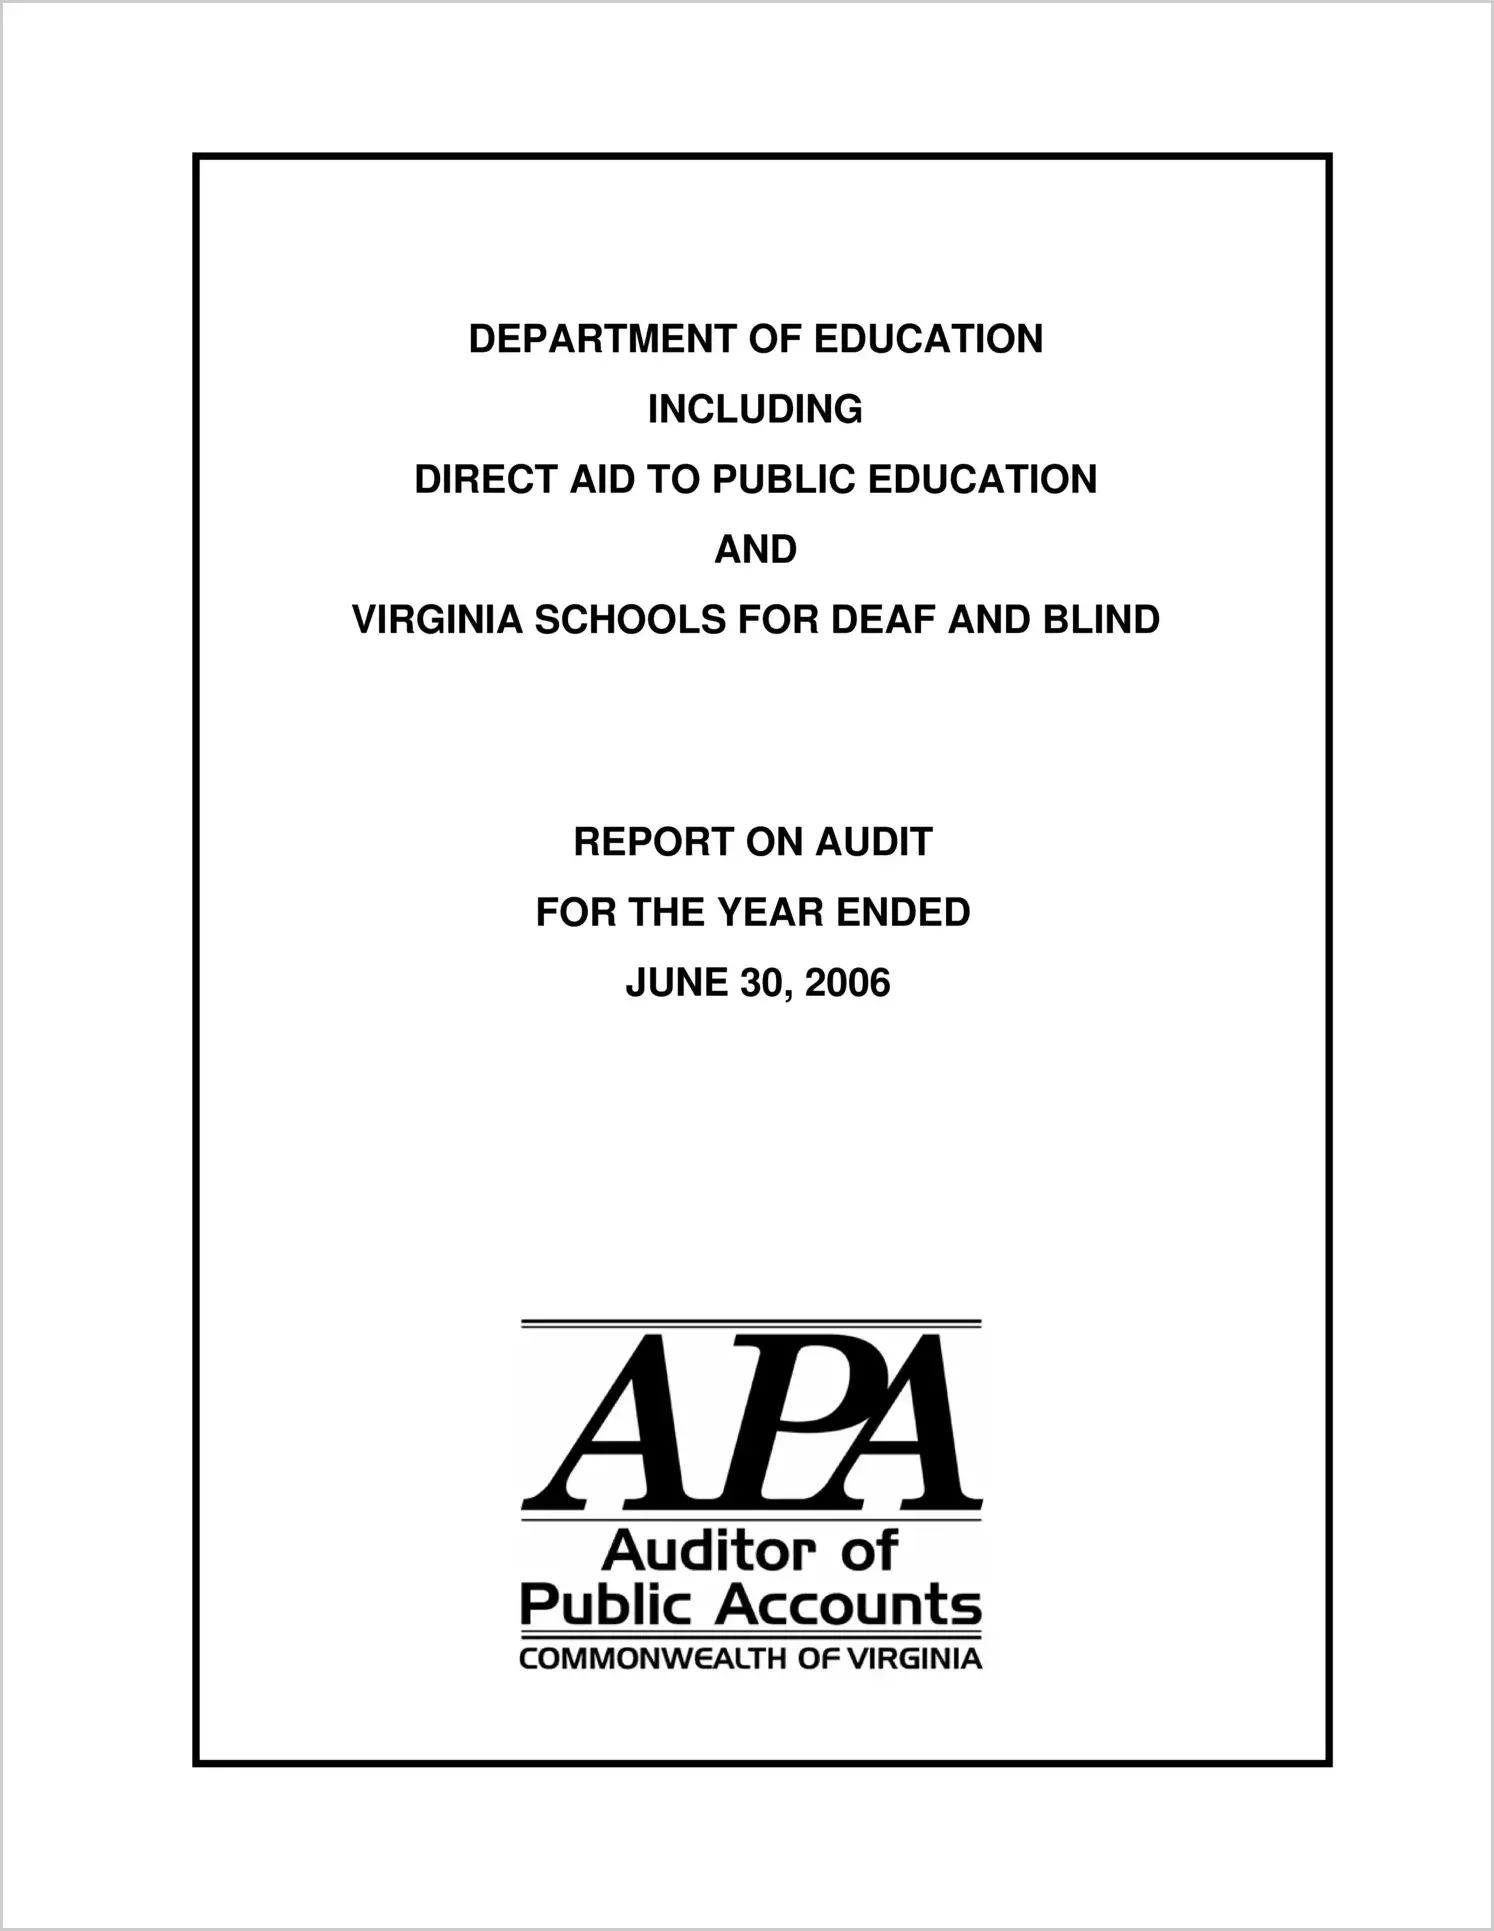 Department of Education Including Direct Aid to Public Education and  Virginia Schools for the Deaf and Blind for the year ended June 30, 2006